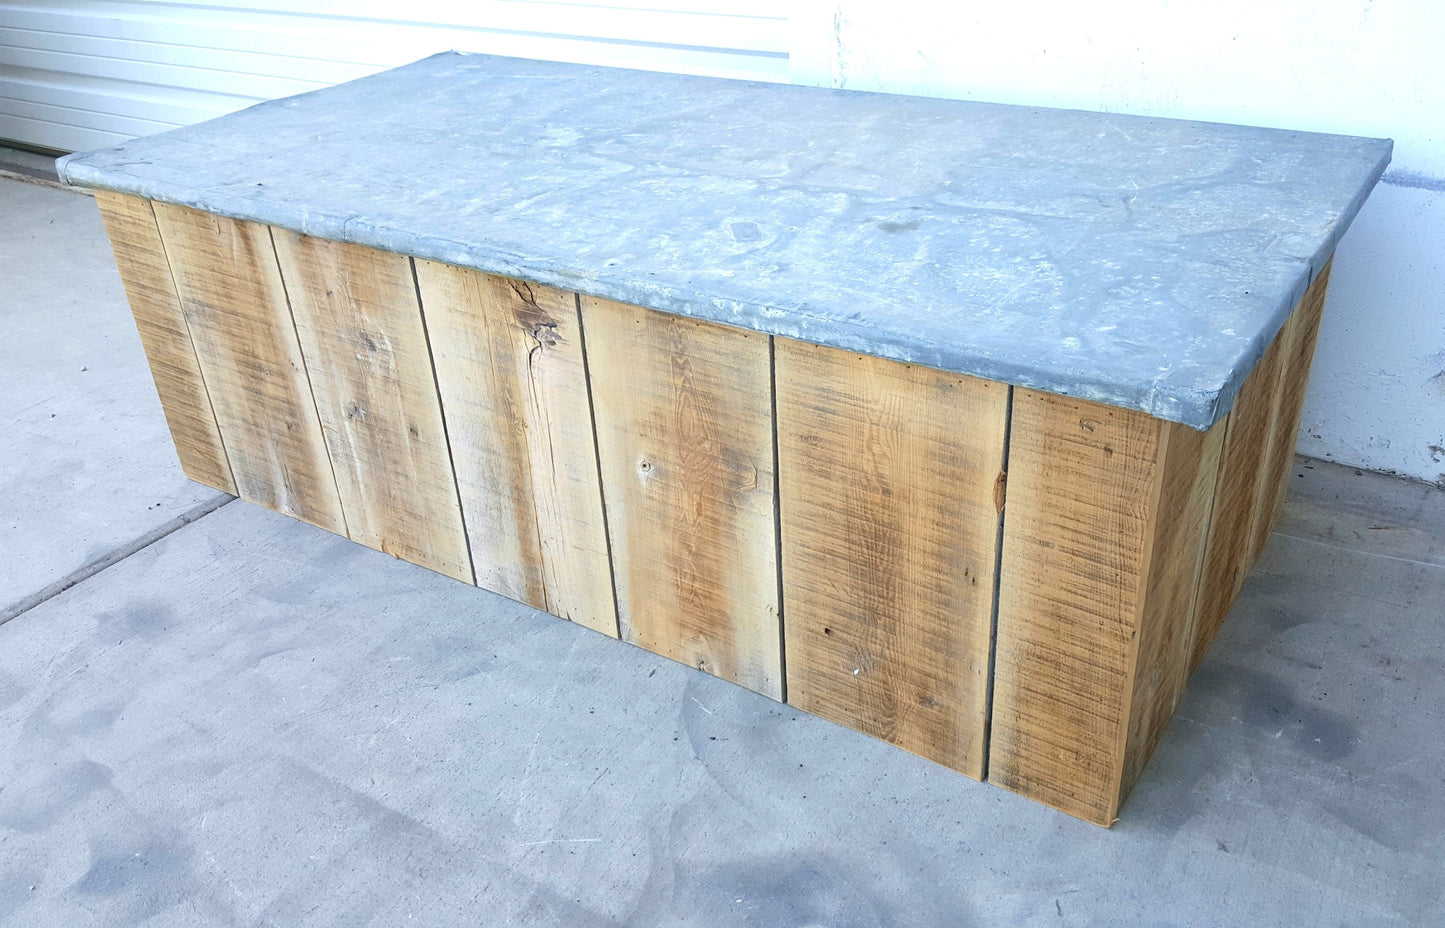 Repurposed Coffee Table with Storage